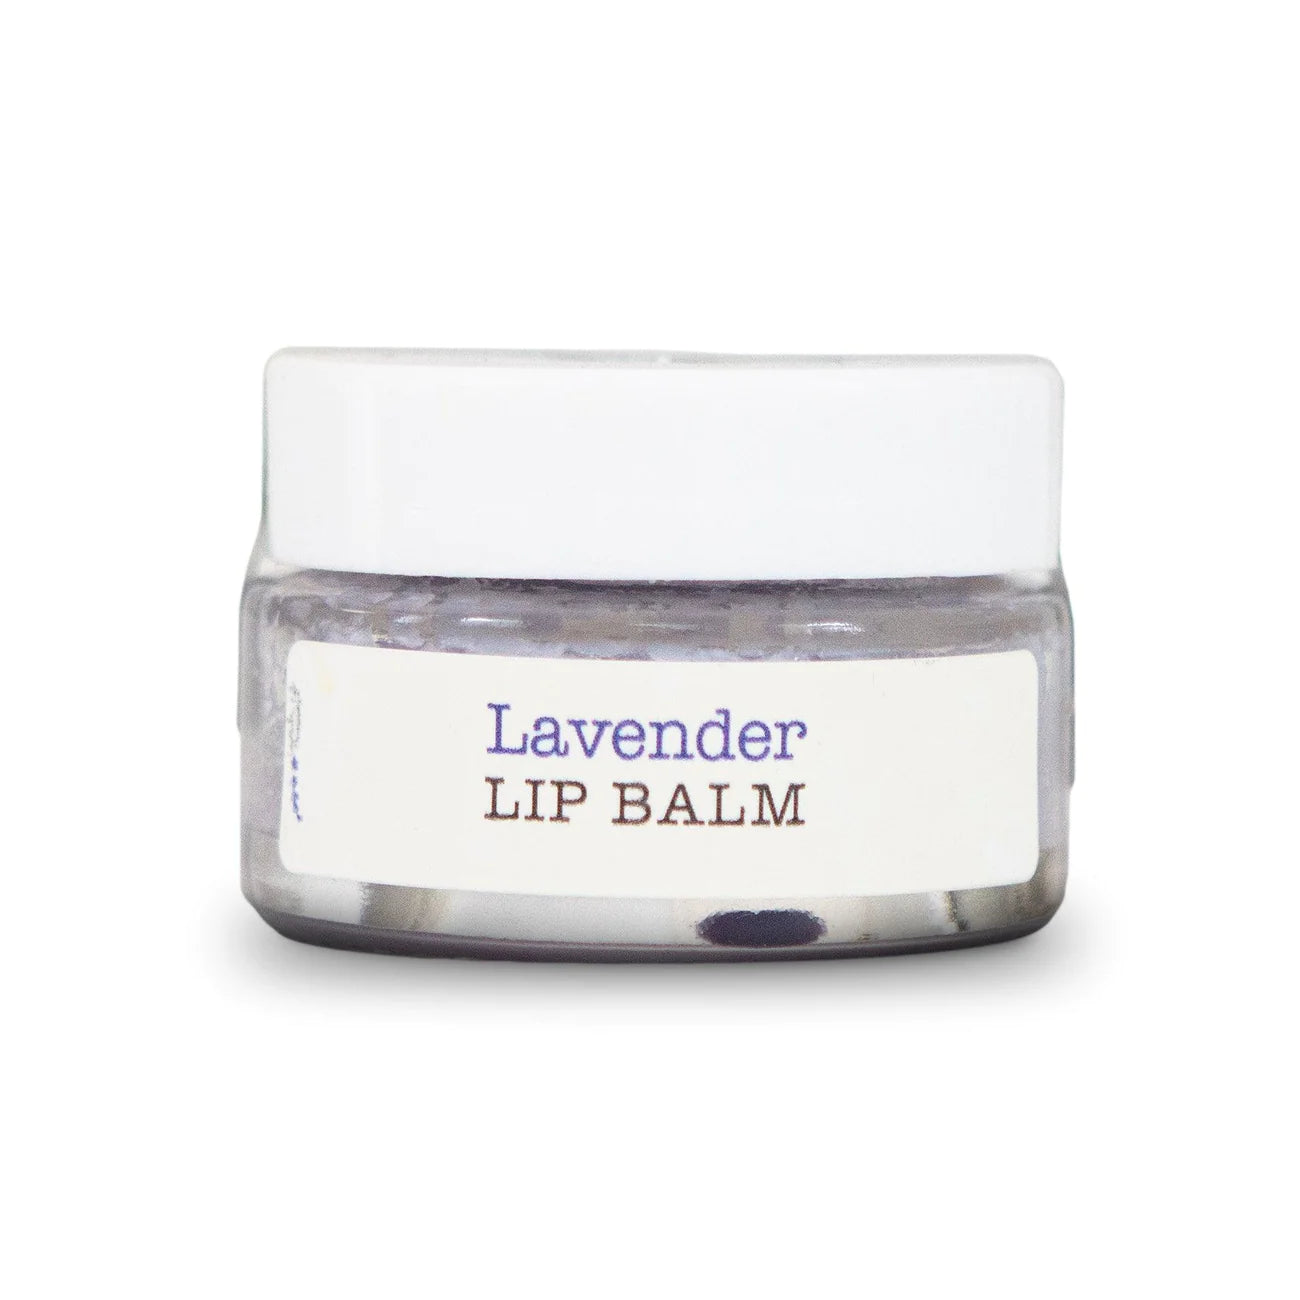 Soothing Dry Lips: How Lavender Lip Balm Can Help in Winter